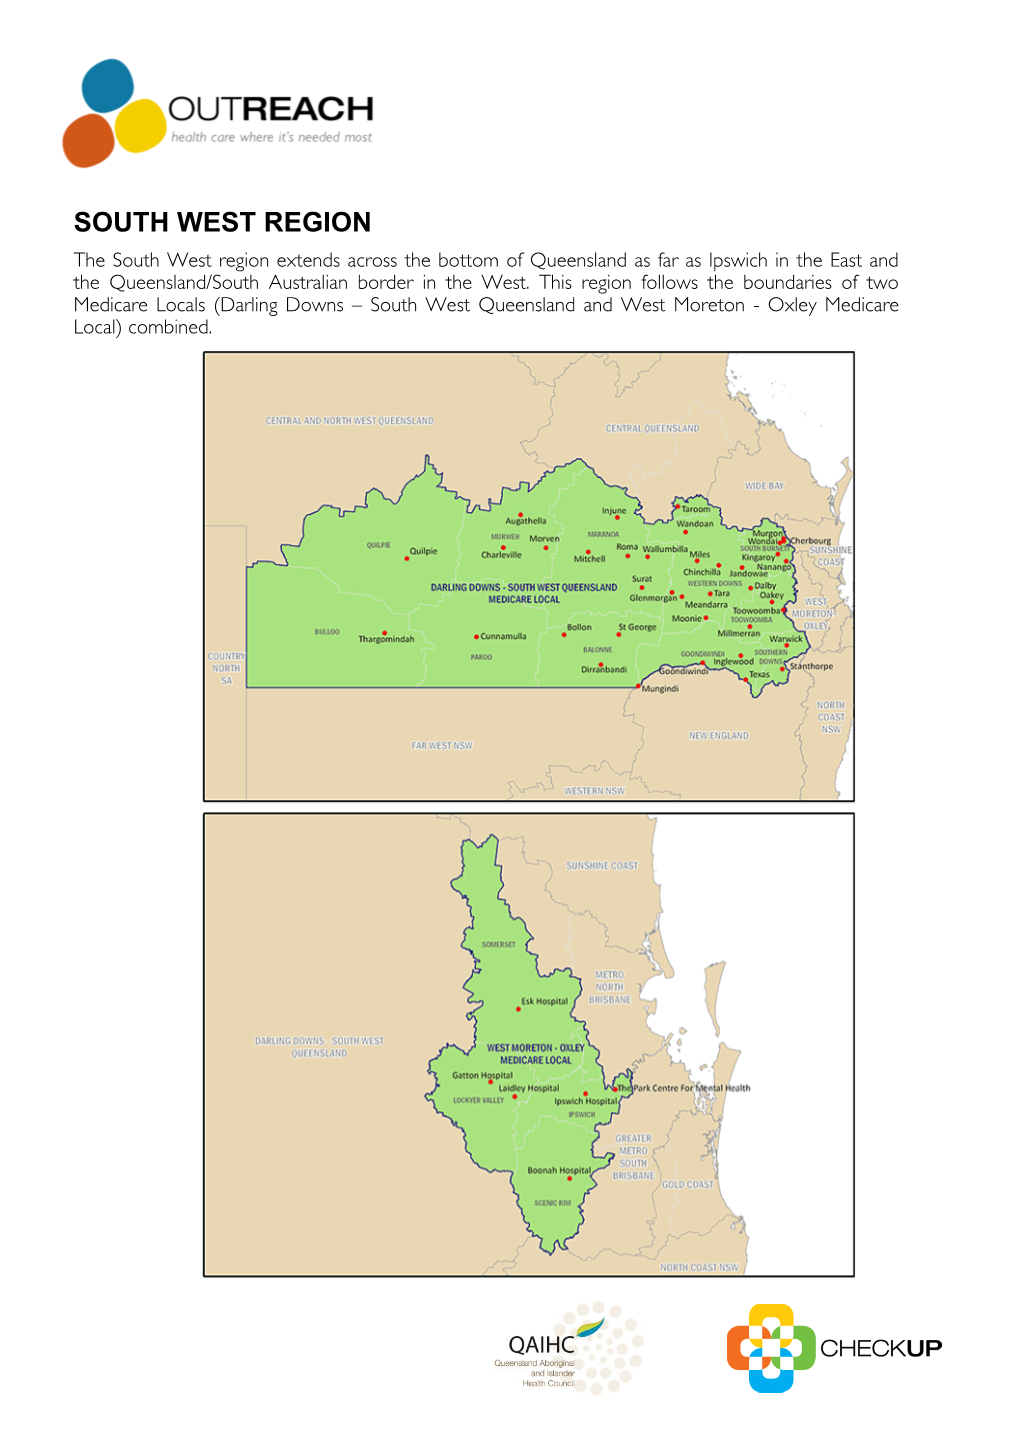 SOUTH WEST REGION the South West Region Extends Across the Bottom of Queensland As Far As Ipswich in the East and the Queensland/South Australian Border in the West